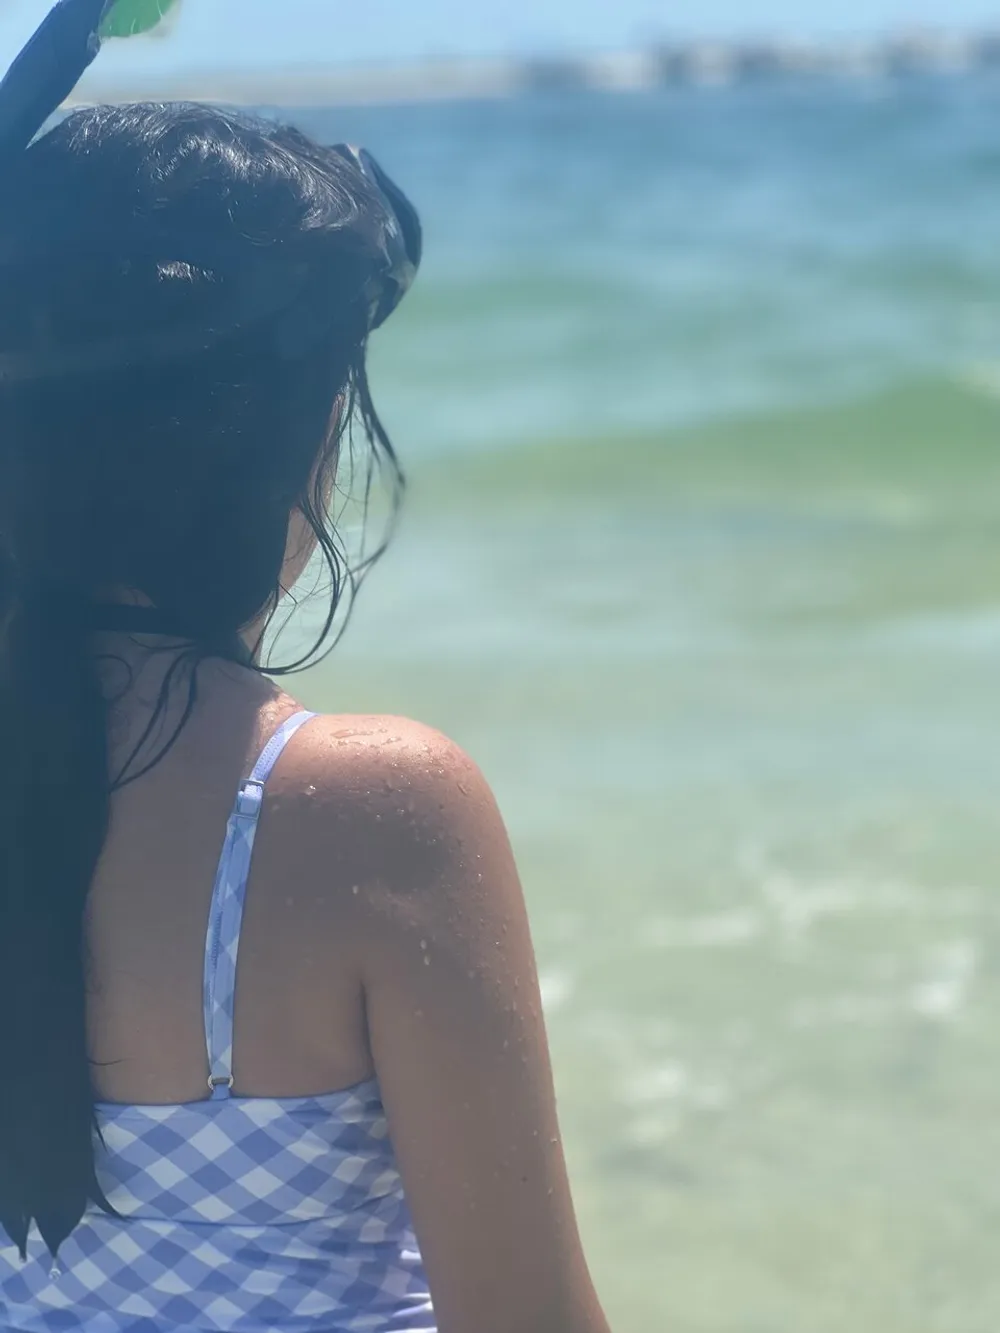 A person in a blue checkered swimsuit is gazing out at the sea with droplets of water on their skin suggesting they may have been enjoying a swim